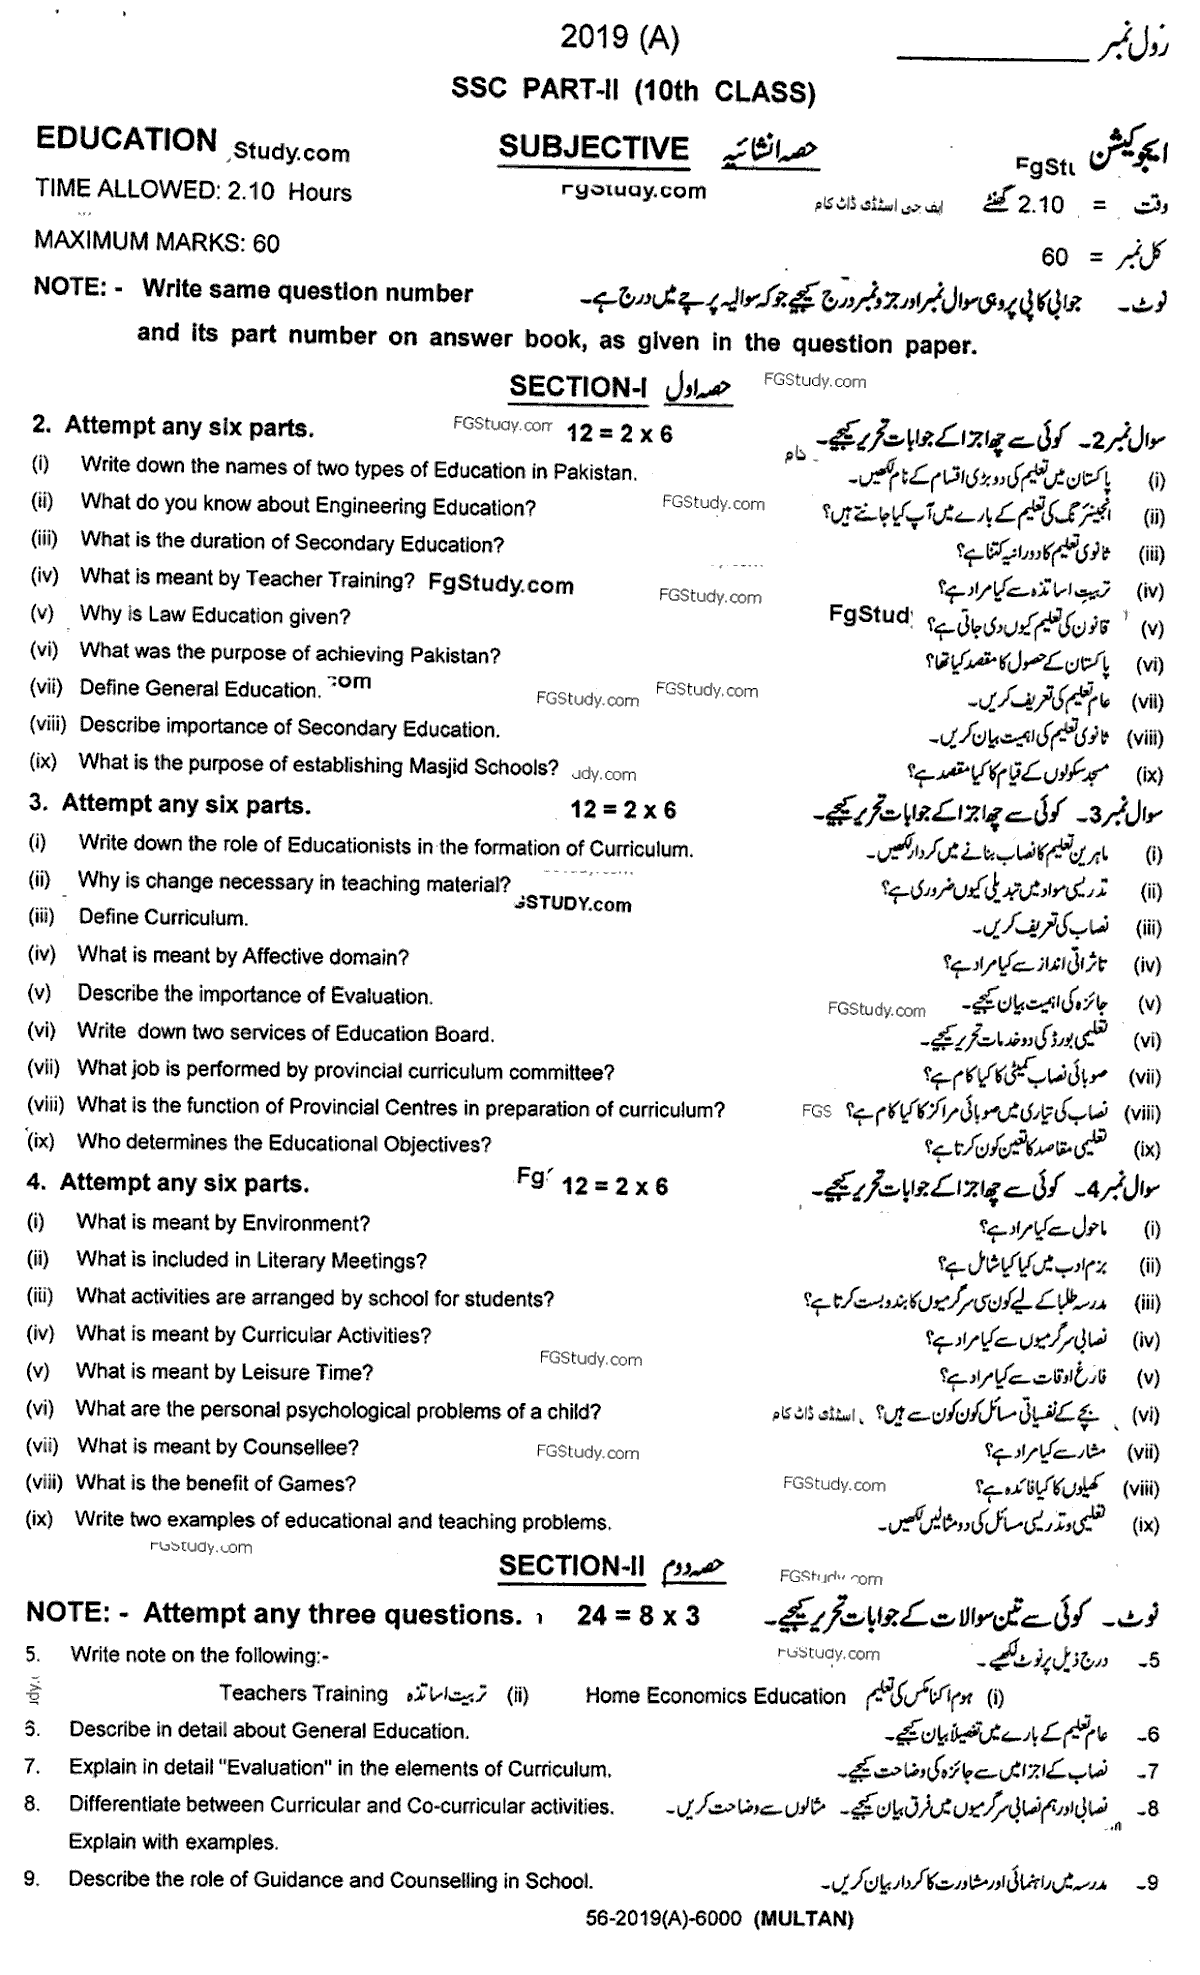 Education 10th Class Past Papers 2019